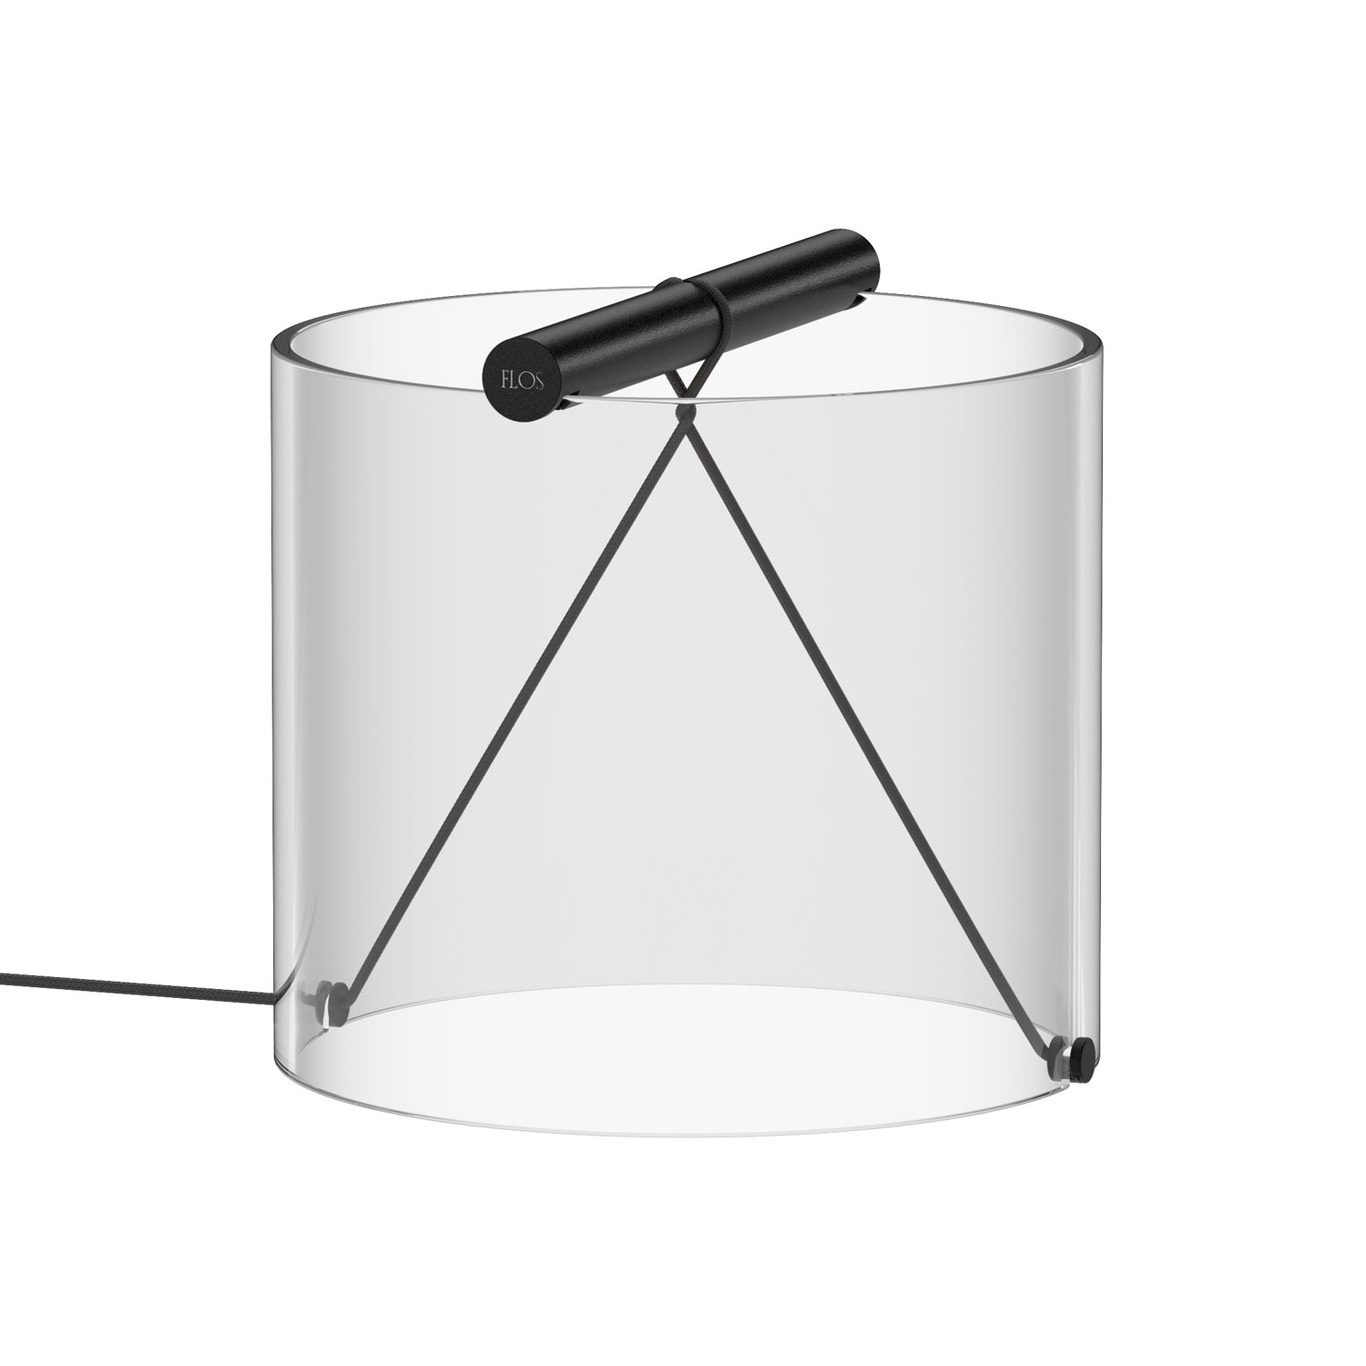 To-Tie T1 Table Lamp, Matte Black